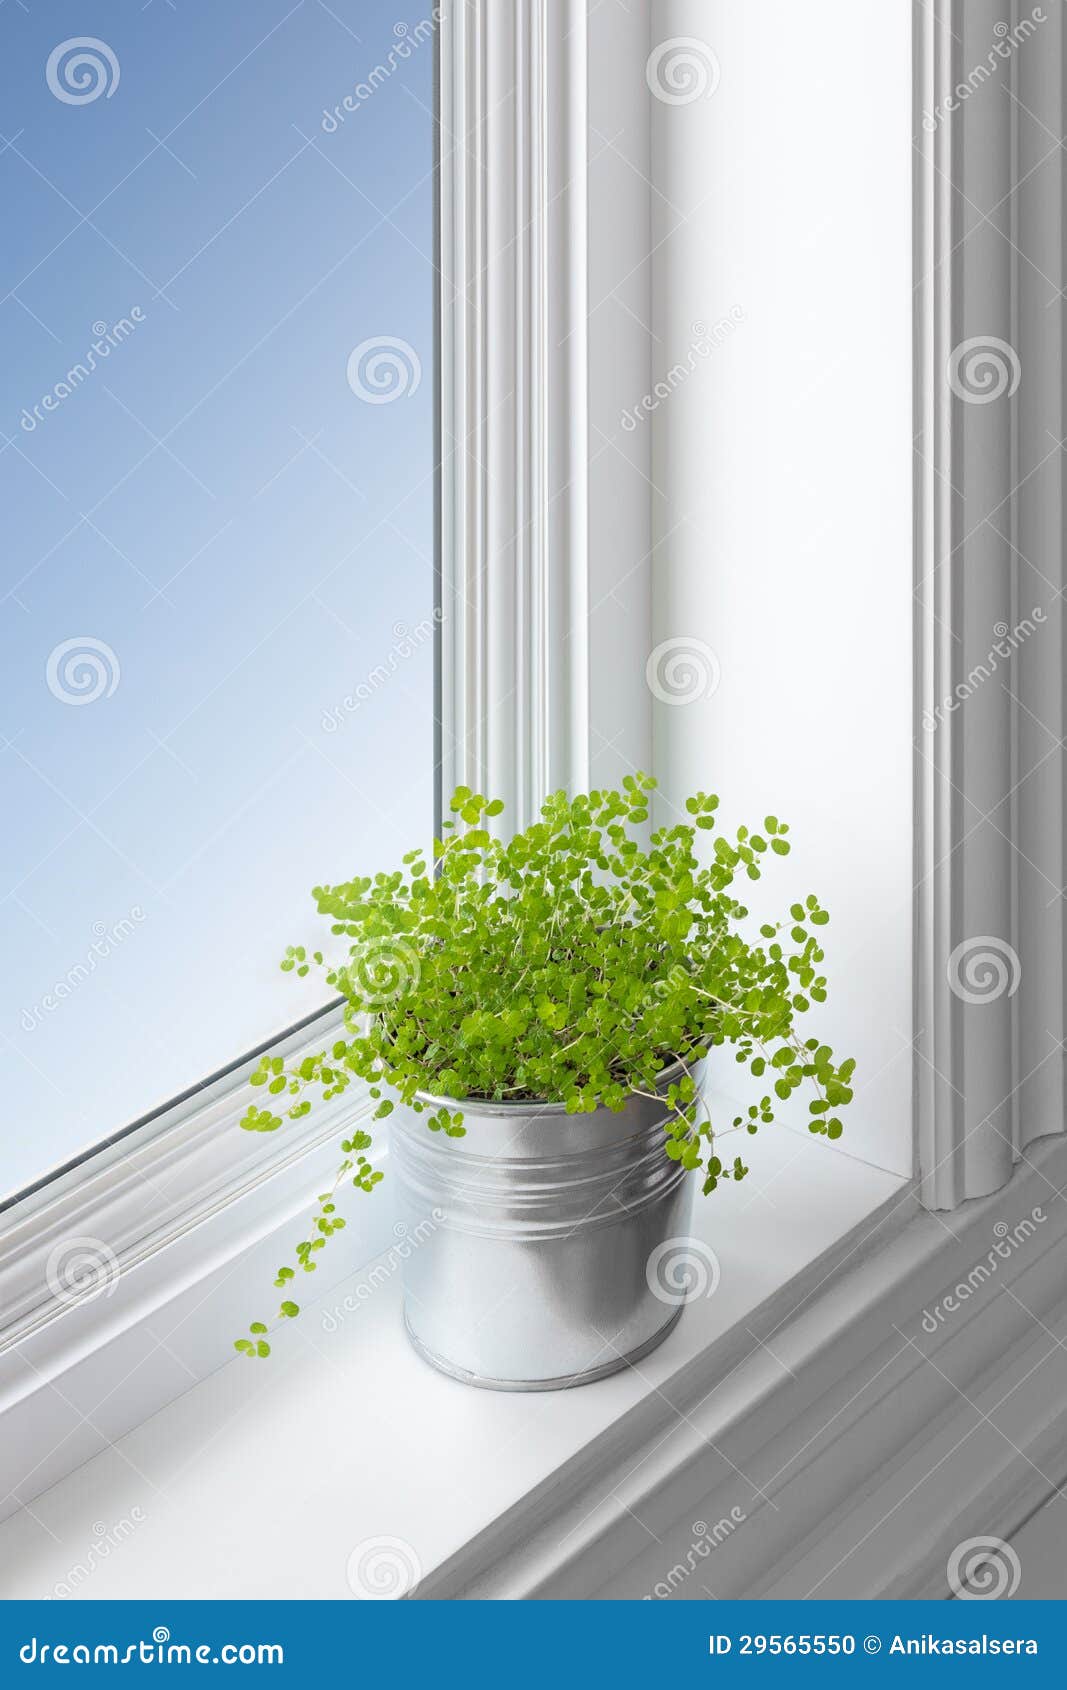 Green Plant On A Window Sill Stock Photo - Image of gray ...